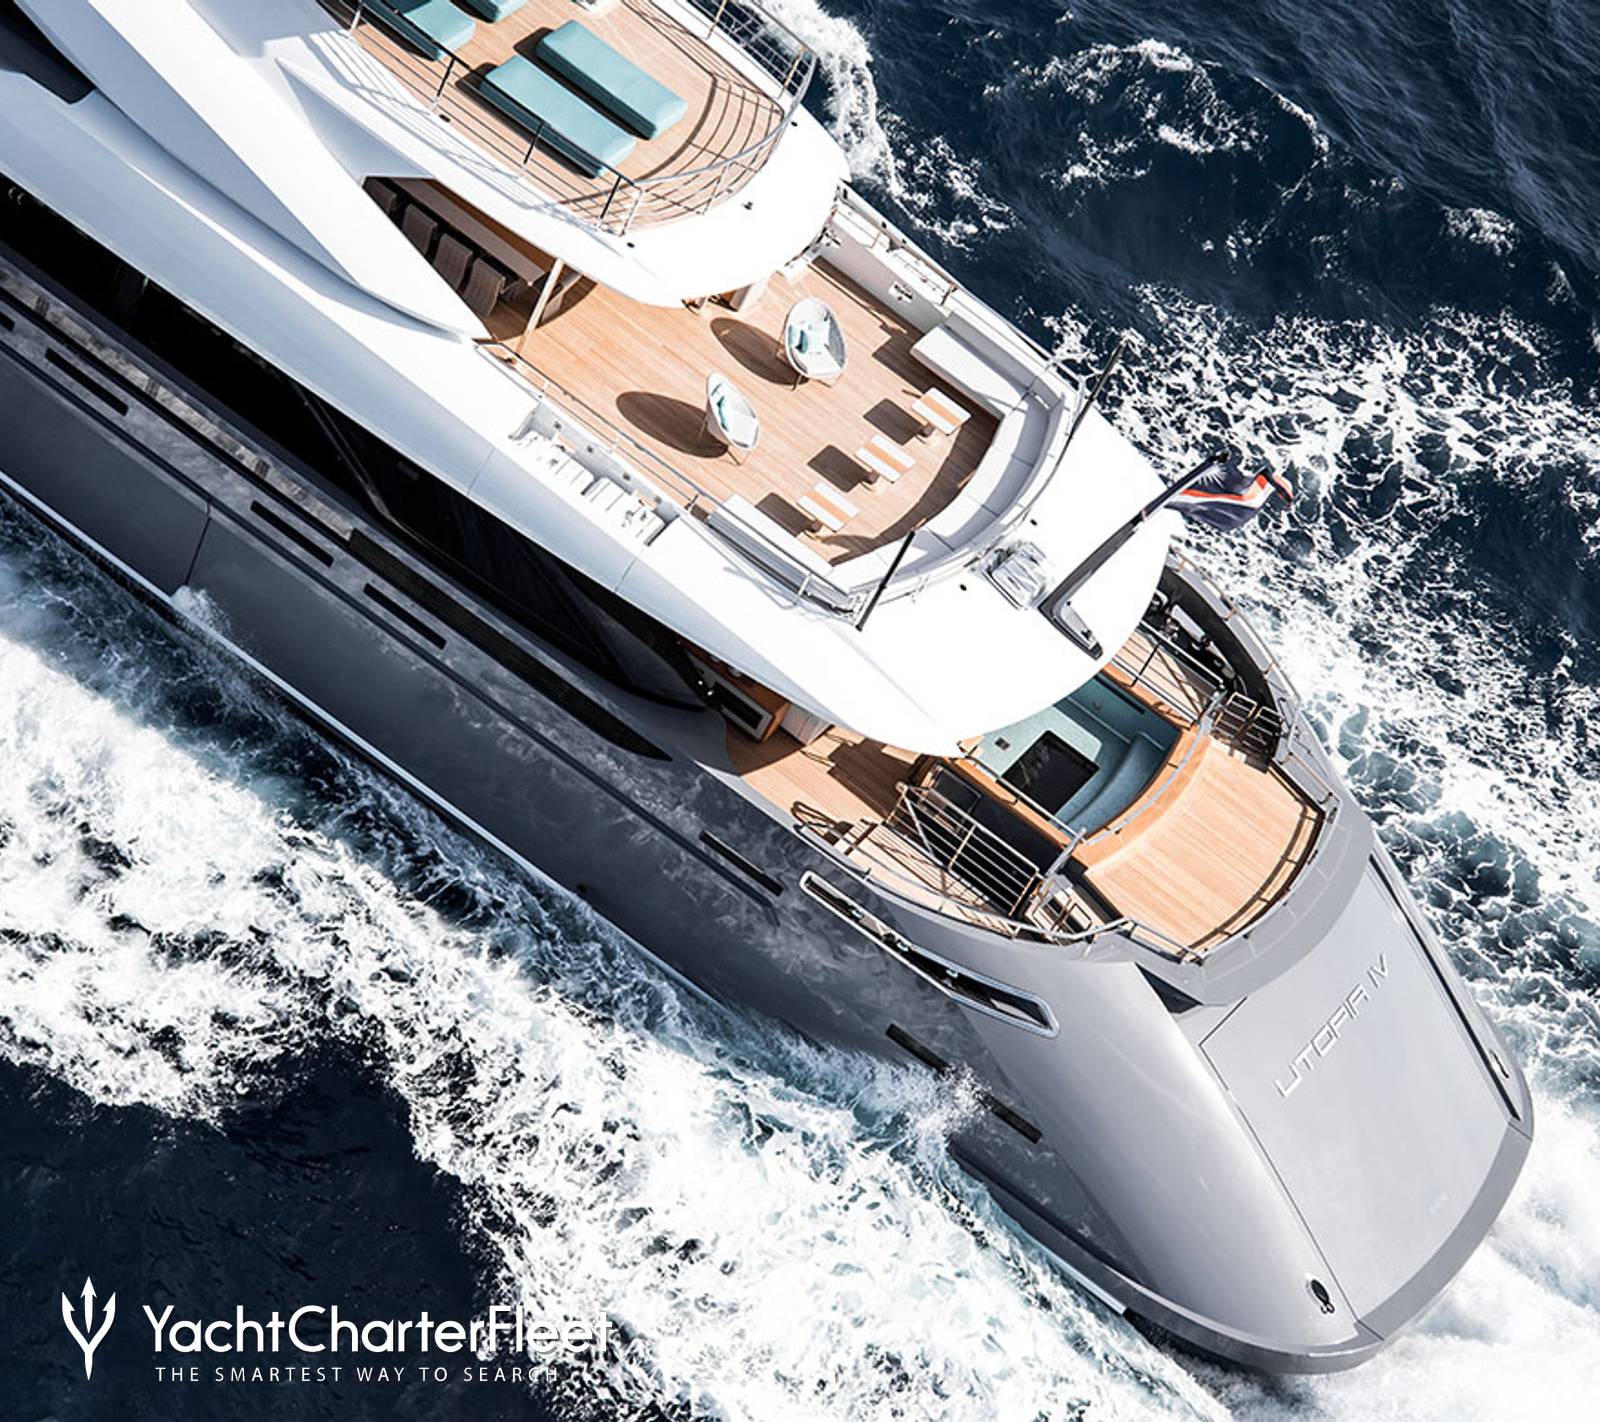 Video Take A Tour Of Superyacht Utopia Iv Ahead Of Her Debut At Flibs 18 Yacht Charter Fleet